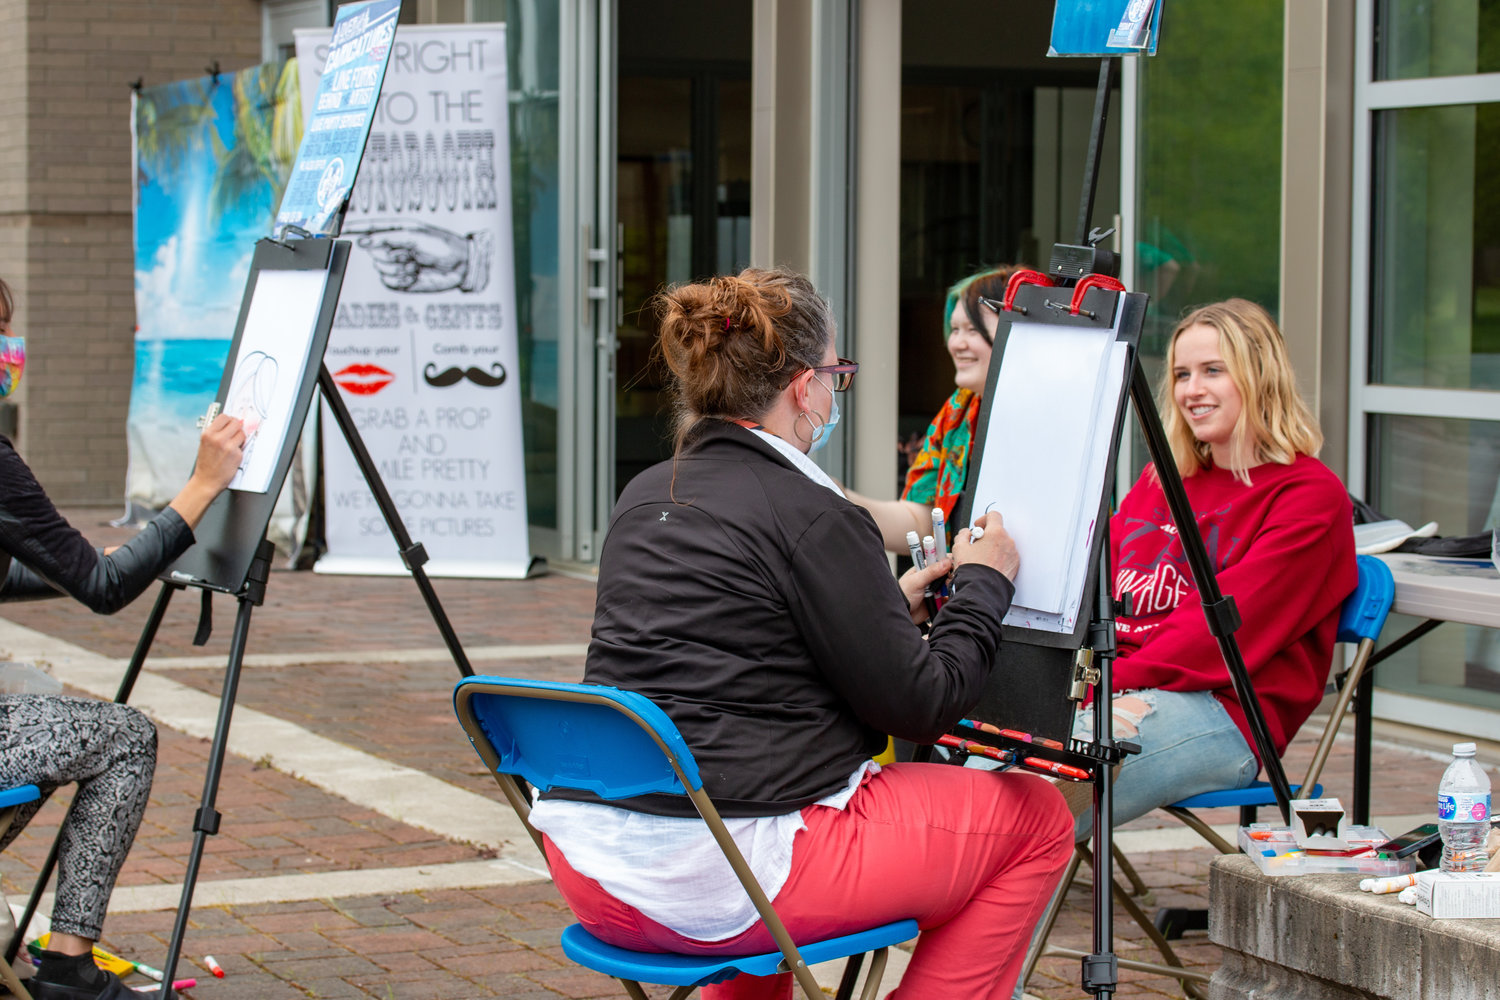 Hand-drawn caricatures were available at the Centralia College SpringFest Tuesday afternoon.